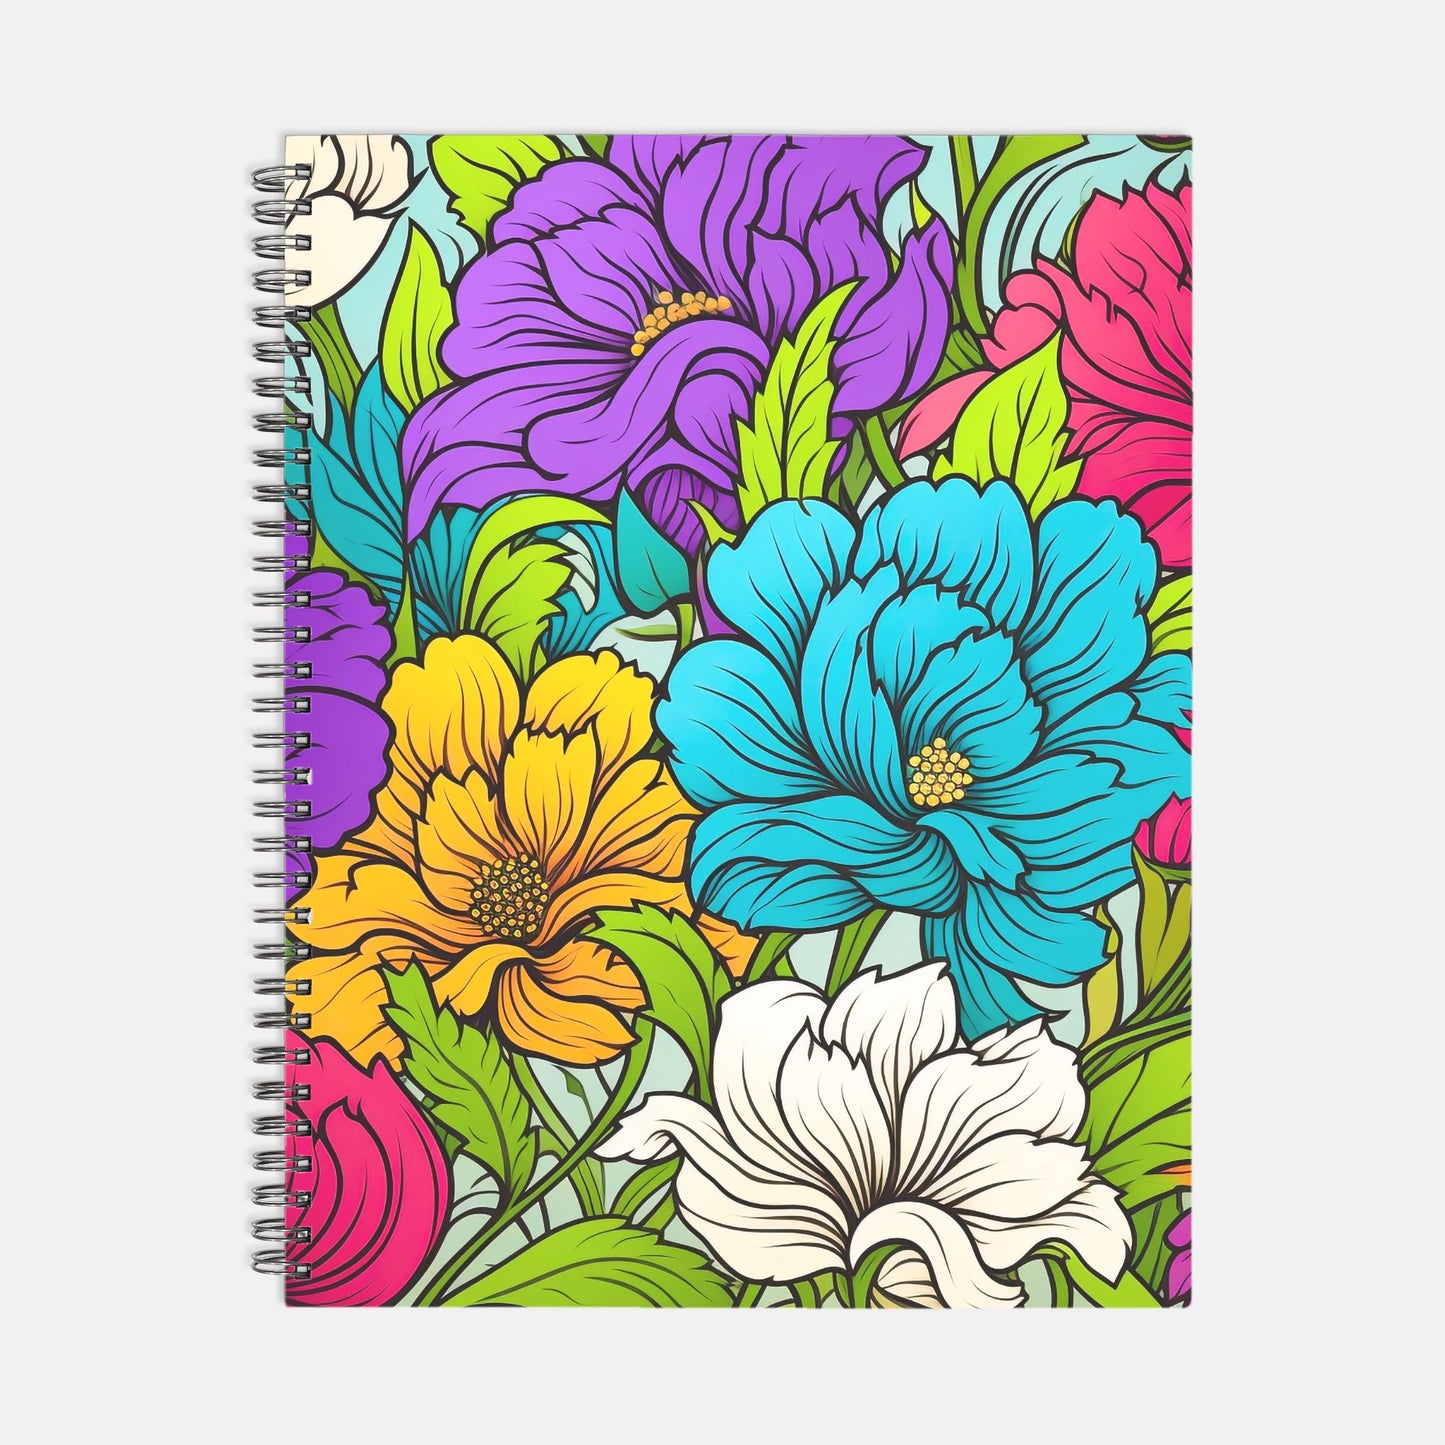 Notebook Hardcover Spiral 8.5 x 11 - Blooming Bright